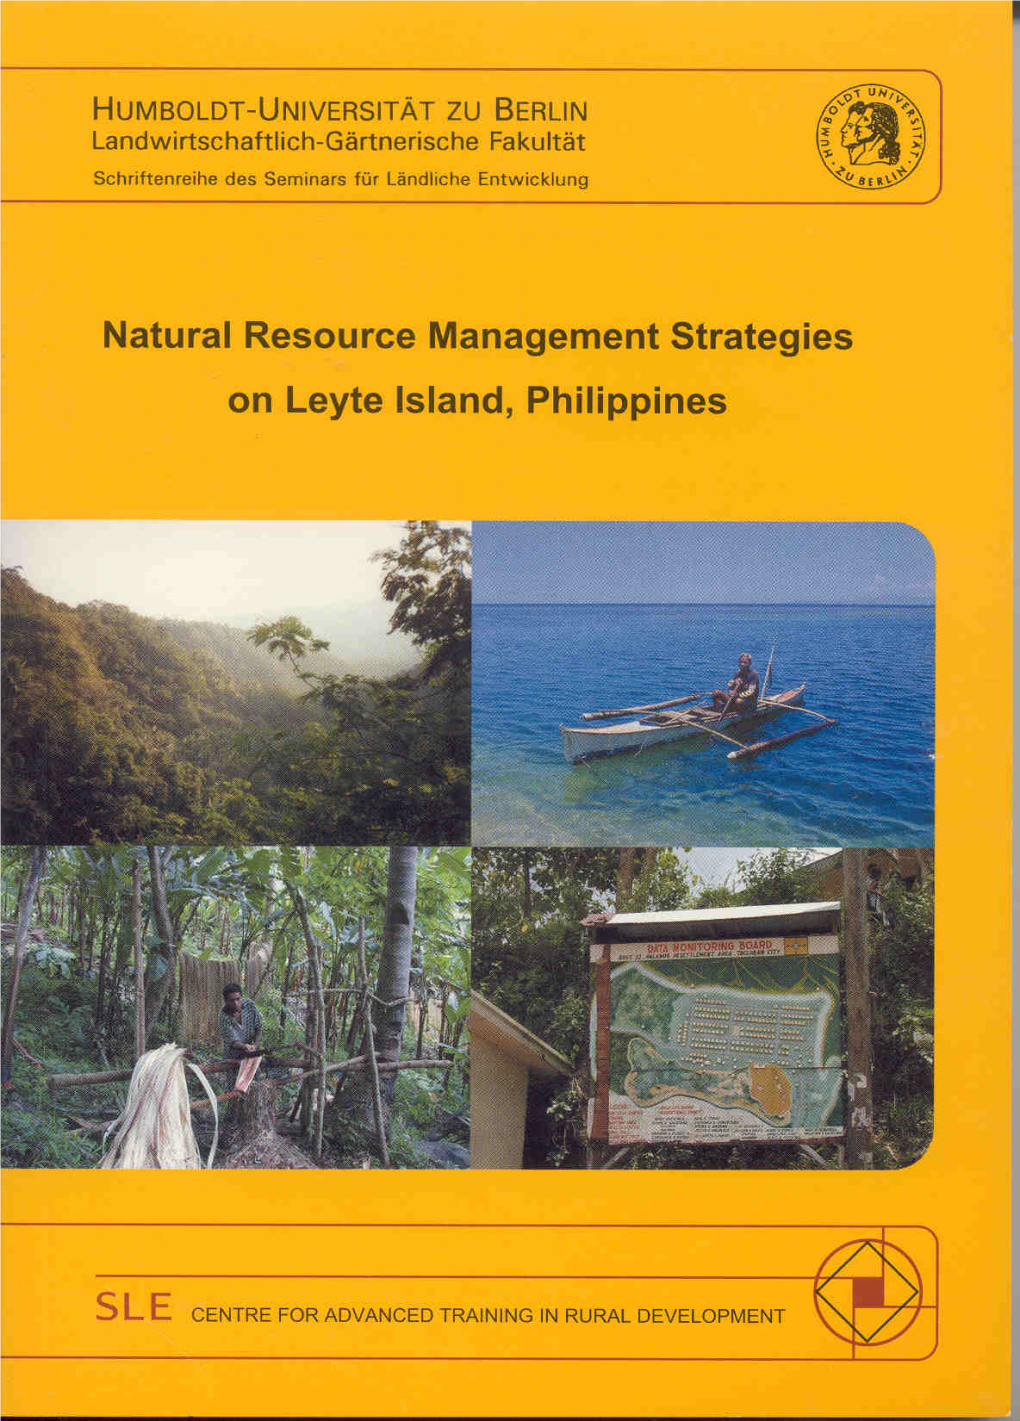 Natural Resource Management Strategies on Leyte Island, Philippines